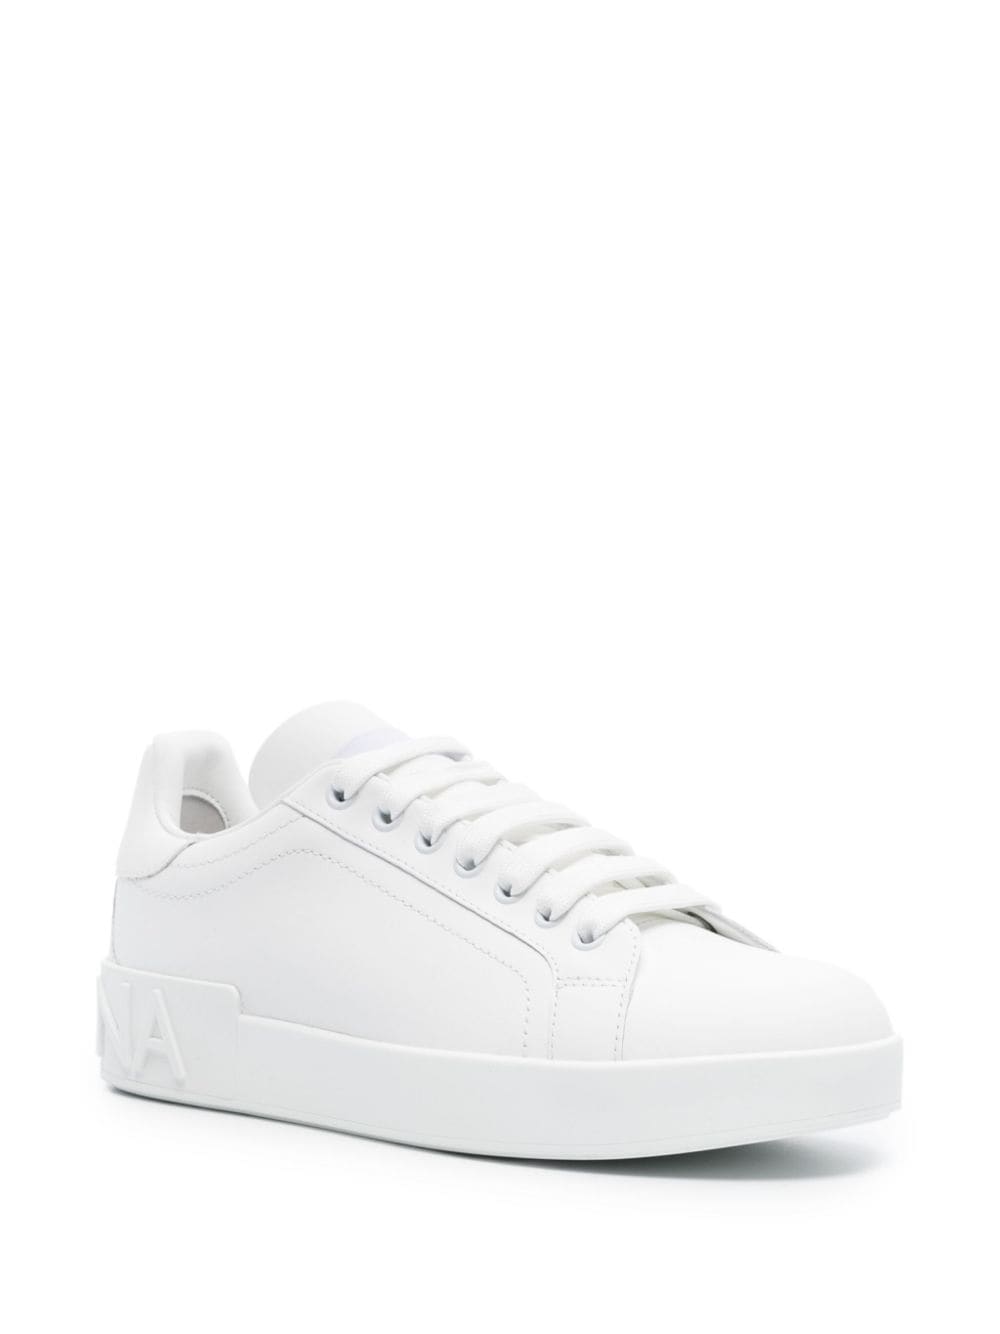 Sneakers total white con patch logo